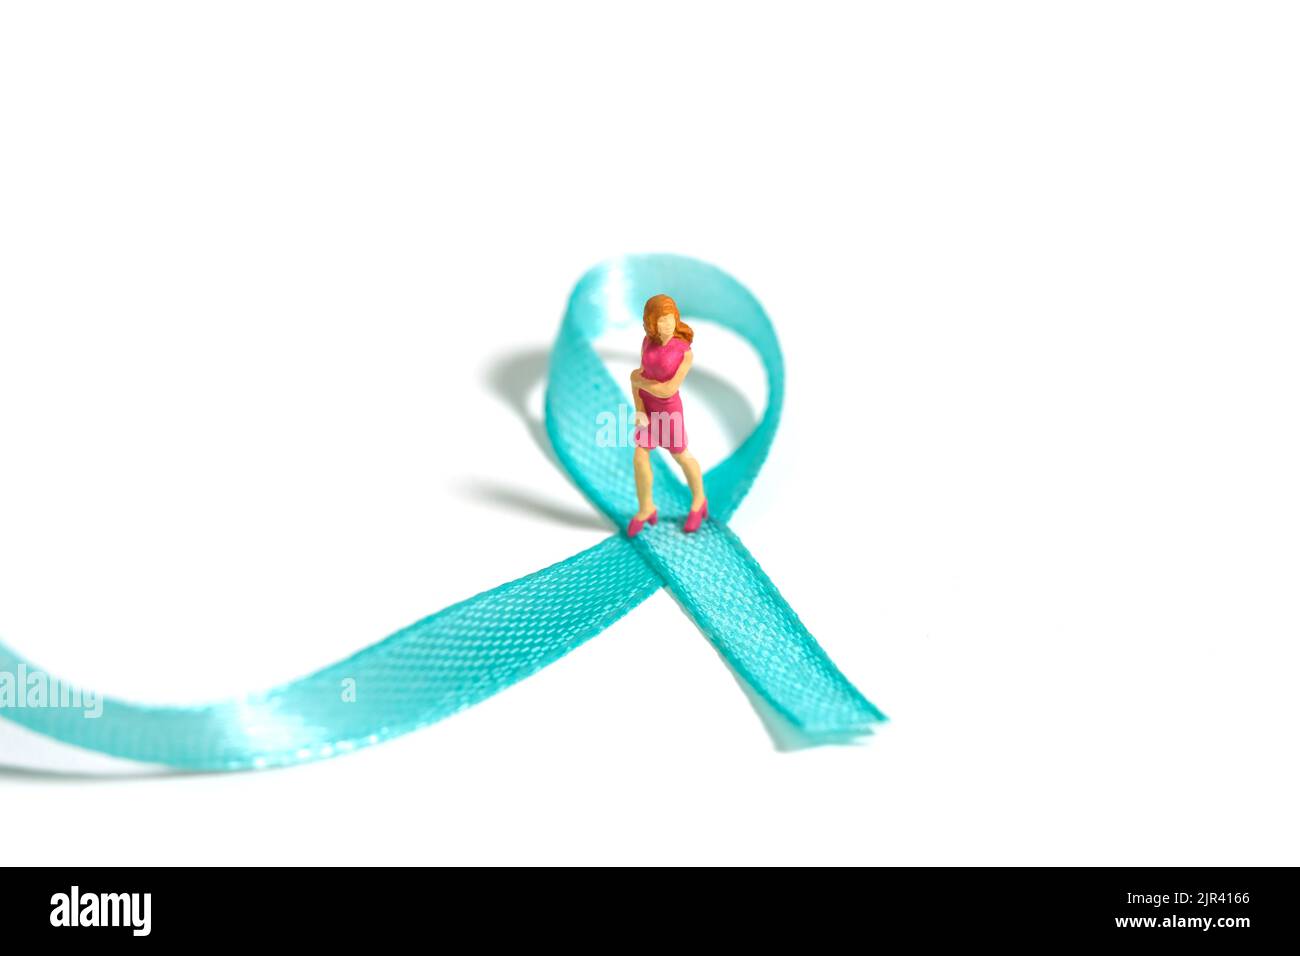 Miniature people figure toys photography. Ovarian and breast cancer awareness day concept. Girl, teenage, woman standing above green turquoise teal ri Stock Photo